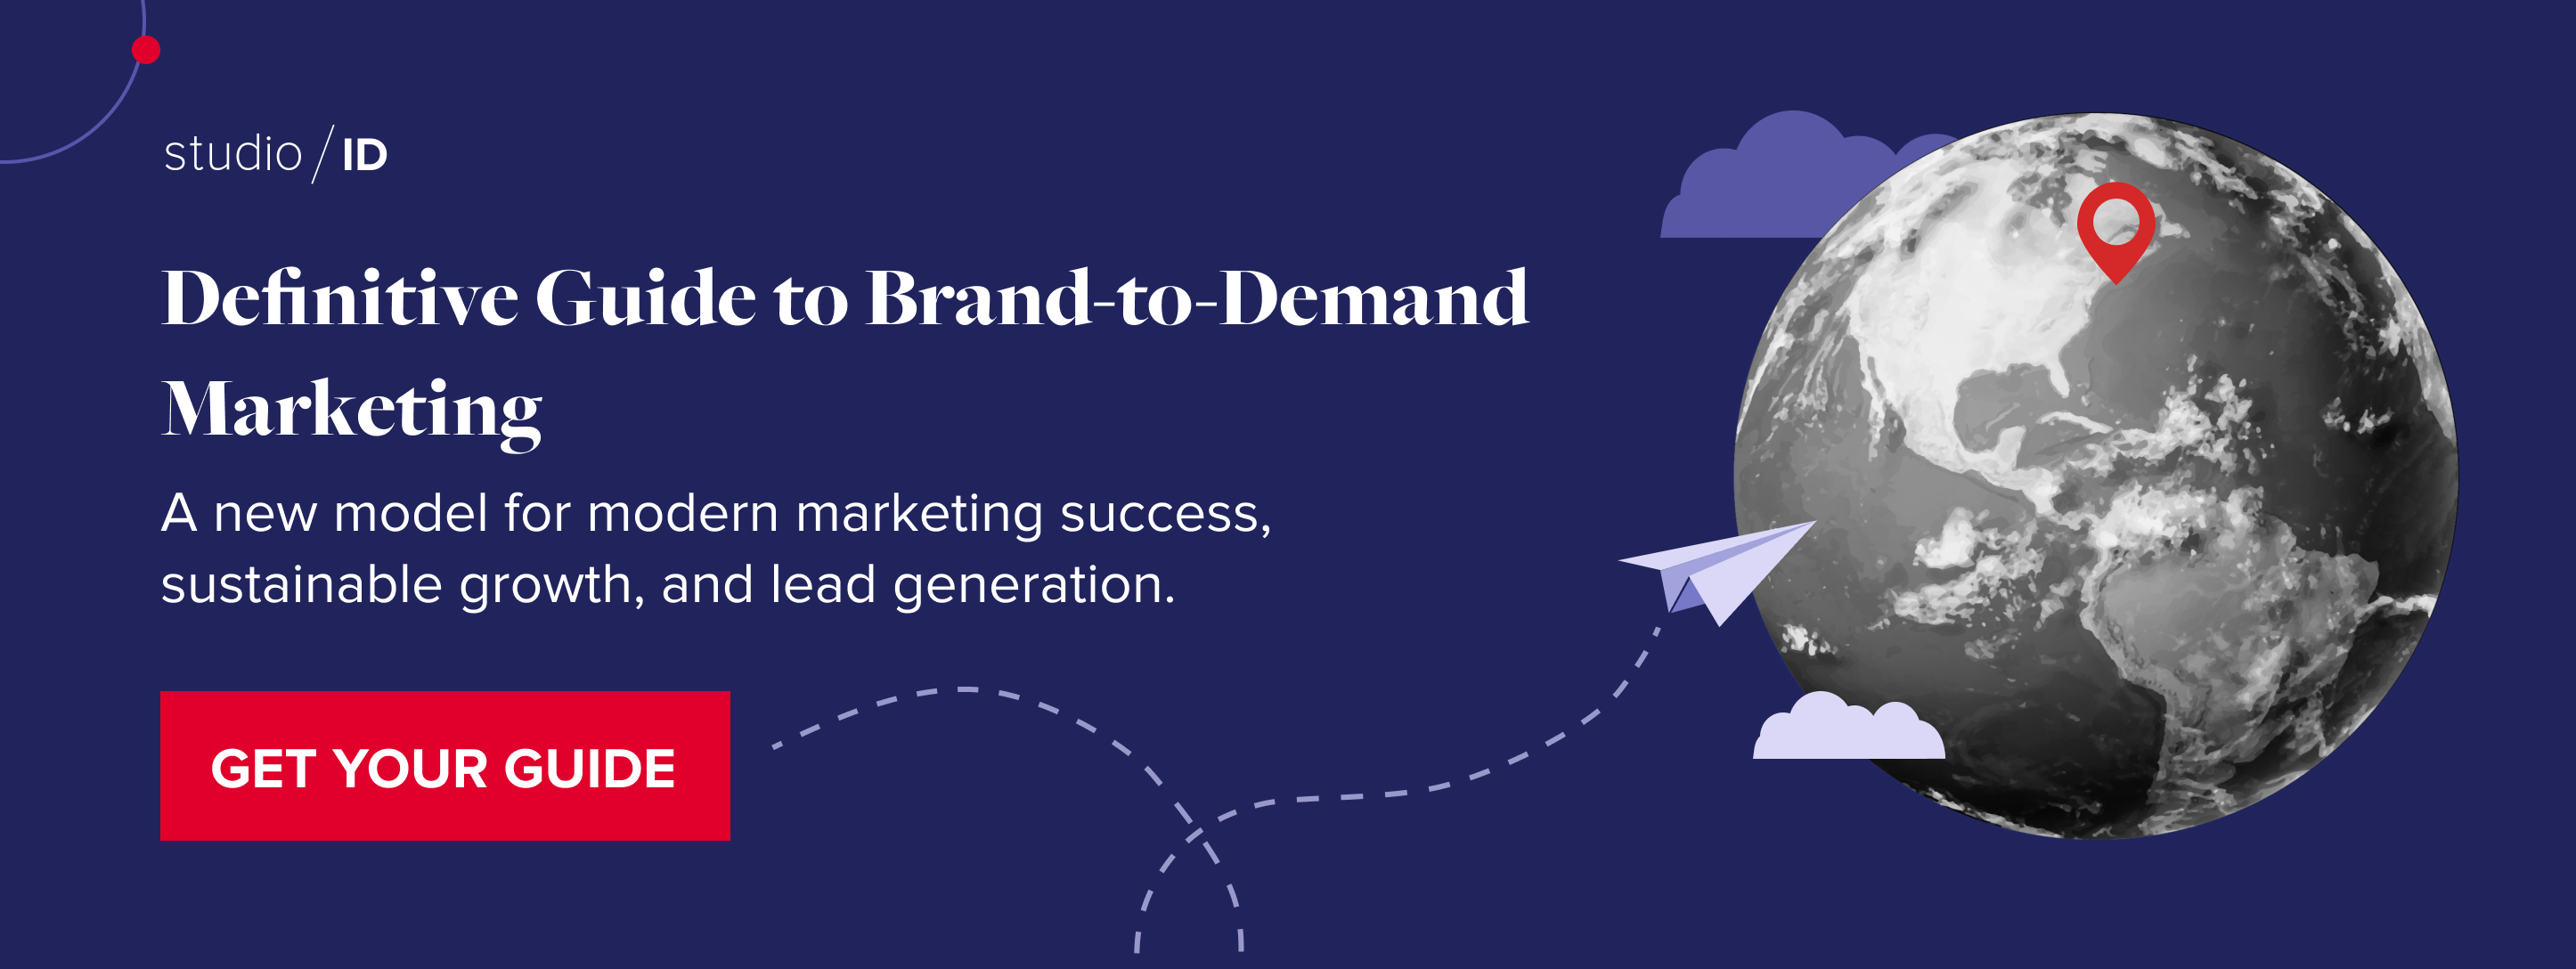 studioID-definitive-guide-to-brand-to-demand-marketing-CTA-card.png